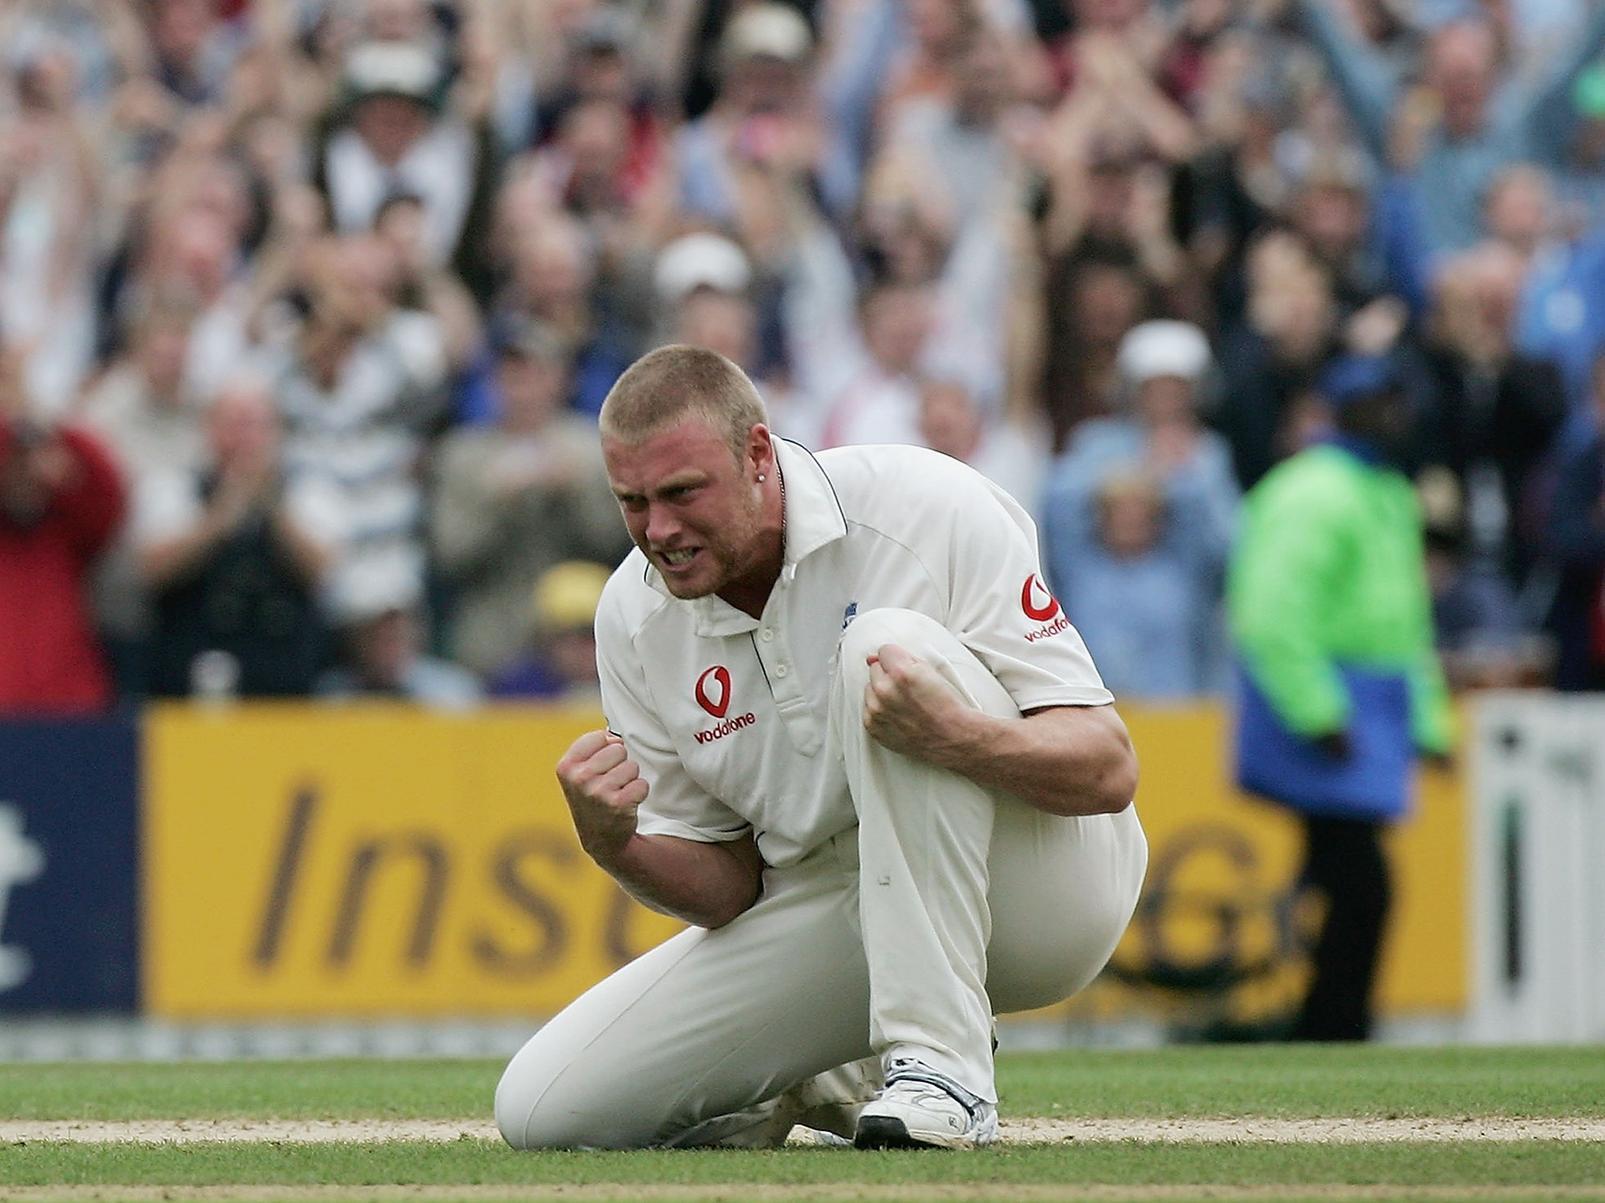 Preston's finest cricketing export, Andrew Flintoff, was England's Ashes hero in 2005. Since retiring he was developed a television career and now presents Top Gear.